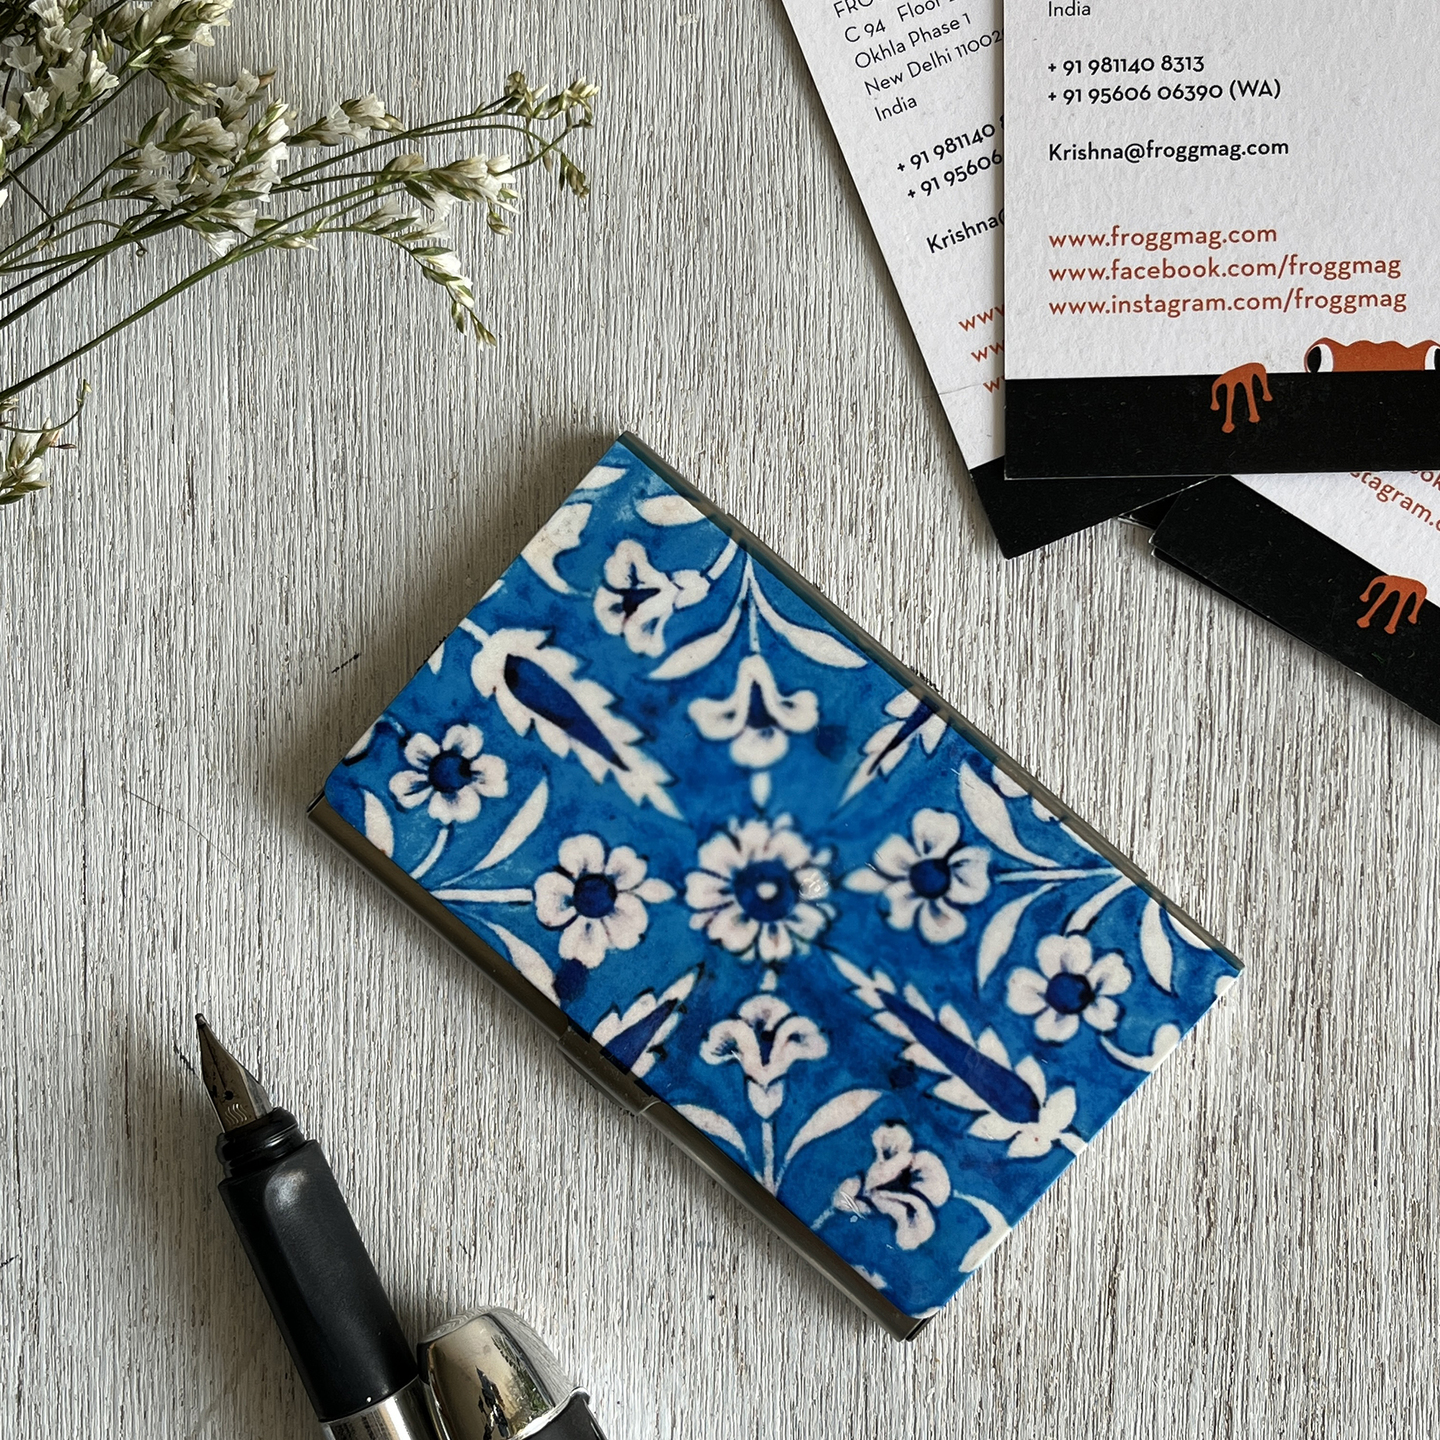 Business Card Holder - Blue Pottery